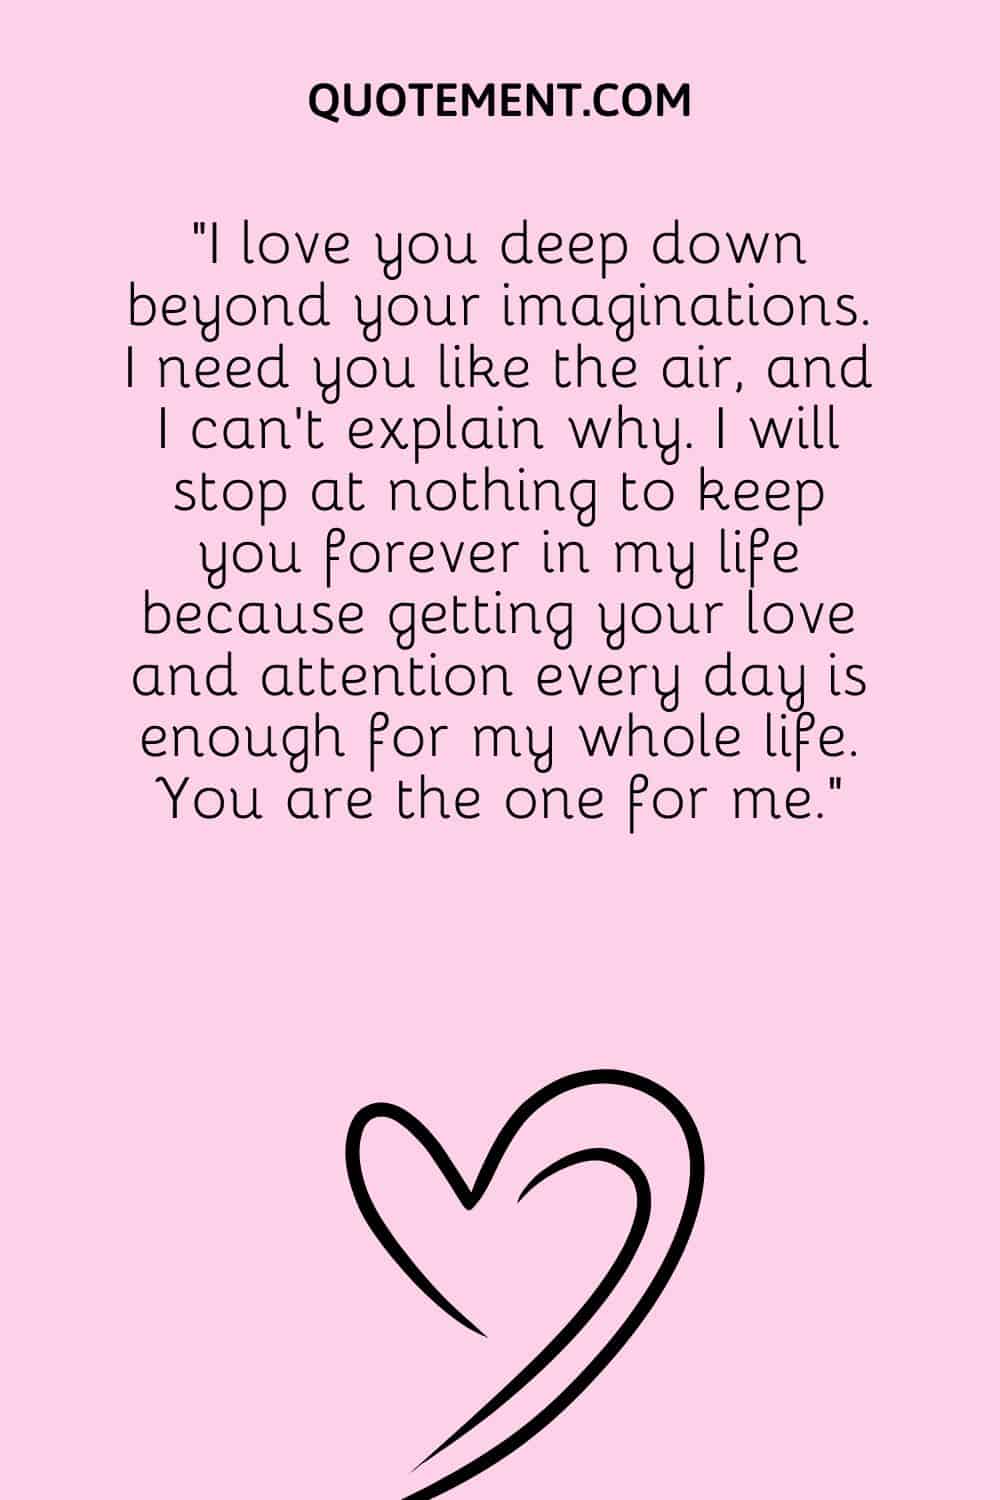 I love you deep down beyond your imaginations